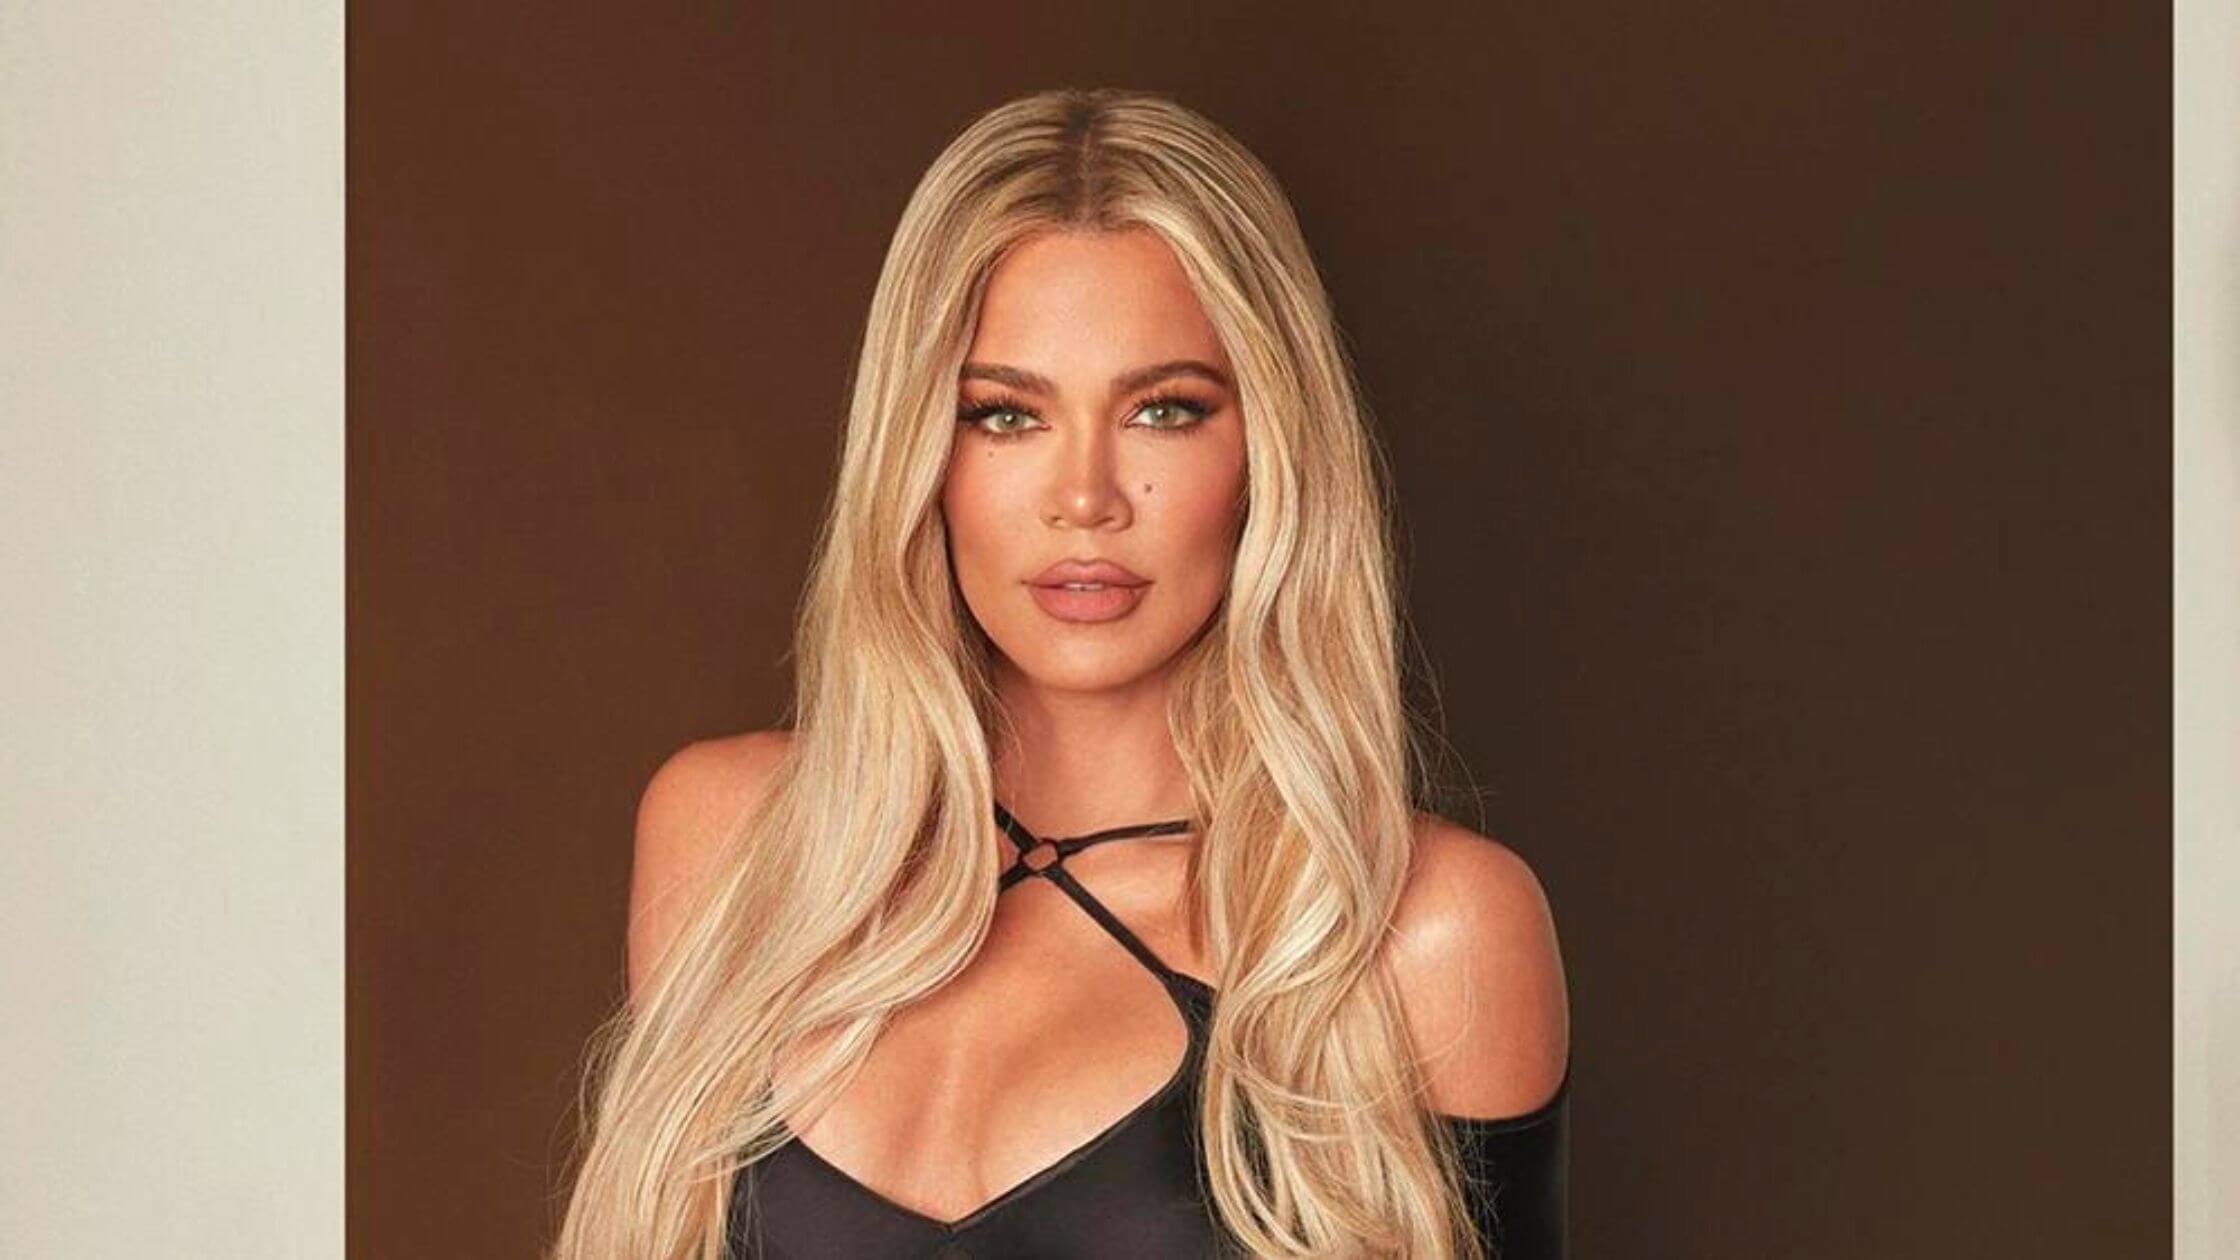 Khloé Kardashian's Response To Tristan Thompson Hanging Out With Another Woman 